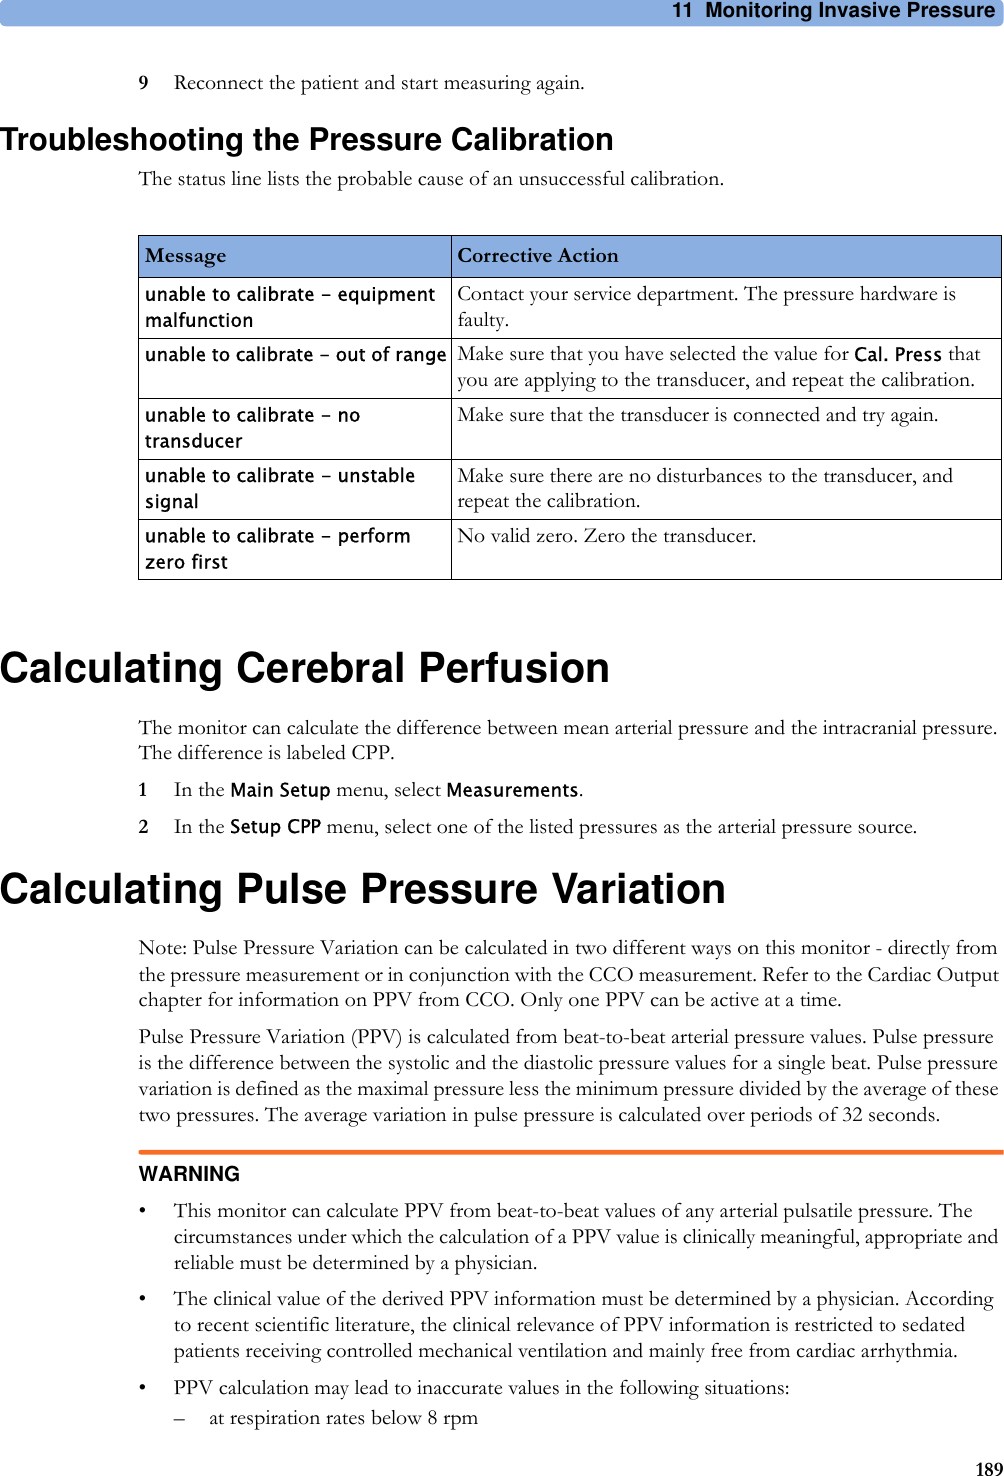 11 Monitoring Invasive Pressure1899Reconnect the patient and start measuring again.Troubleshooting the Pressure CalibrationThe status line lists the probable cause of an unsuccessful calibration.Calculating Cerebral PerfusionThe monitor can calculate the difference between mean arterial pressure and the intracranial pressure. The difference is labeled CPP.1In the Main Setup menu, select Measurements.2In the Setup CPP menu, select one of the listed pressures as the arterial pressure source.Calculating Pulse Pressure VariationNote: Pulse Pressure Variation can be calculated in two different ways on this monitor - directly from the pressure measurement or in conjunction with the CCO measurement. Refer to the Cardiac Output chapter for information on PPV from CCO. Only one PPV can be active at a time.Pulse Pressure Variation (PPV) is calculated from beat-to-beat arterial pressure values. Pulse pressure is the difference between the systolic and the diastolic pressure values for a single beat. Pulse pressure variation is defined as the maximal pressure less the minimum pressure divided by the average of these two pressures. The average variation in pulse pressure is calculated over periods of 32 seconds.WARNING• This monitor can calculate PPV from beat-to-beat values of any arterial pulsatile pressure. The circumstances under which the calculation of a PPV value is clinically meaningful, appropriate and reliable must be determined by a physician.• The clinical value of the derived PPV information must be determined by a physician. According to recent scientific literature, the clinical relevance of PPV information is restricted to sedated patients receiving controlled mechanical ventilation and mainly free from cardiac arrhythmia.• PPV calculation may lead to inaccurate values in the following situations:– at respiration rates below 8 rpmMessage Corrective Actionunable to calibrate - equipment malfunctionContact your service department. The pressure hardware is faulty.unable to calibrate - out of range Make sure that you have selected the value for Cal. Press that you are applying to the transducer, and repeat the calibration.unable to calibrate - no transducerMake sure that the transducer is connected and try again.unable to calibrate - unstable signalMake sure there are no disturbances to the transducer, and repeat the calibration.unable to calibrate - perform zero firstNo valid zero. Zero the transducer.